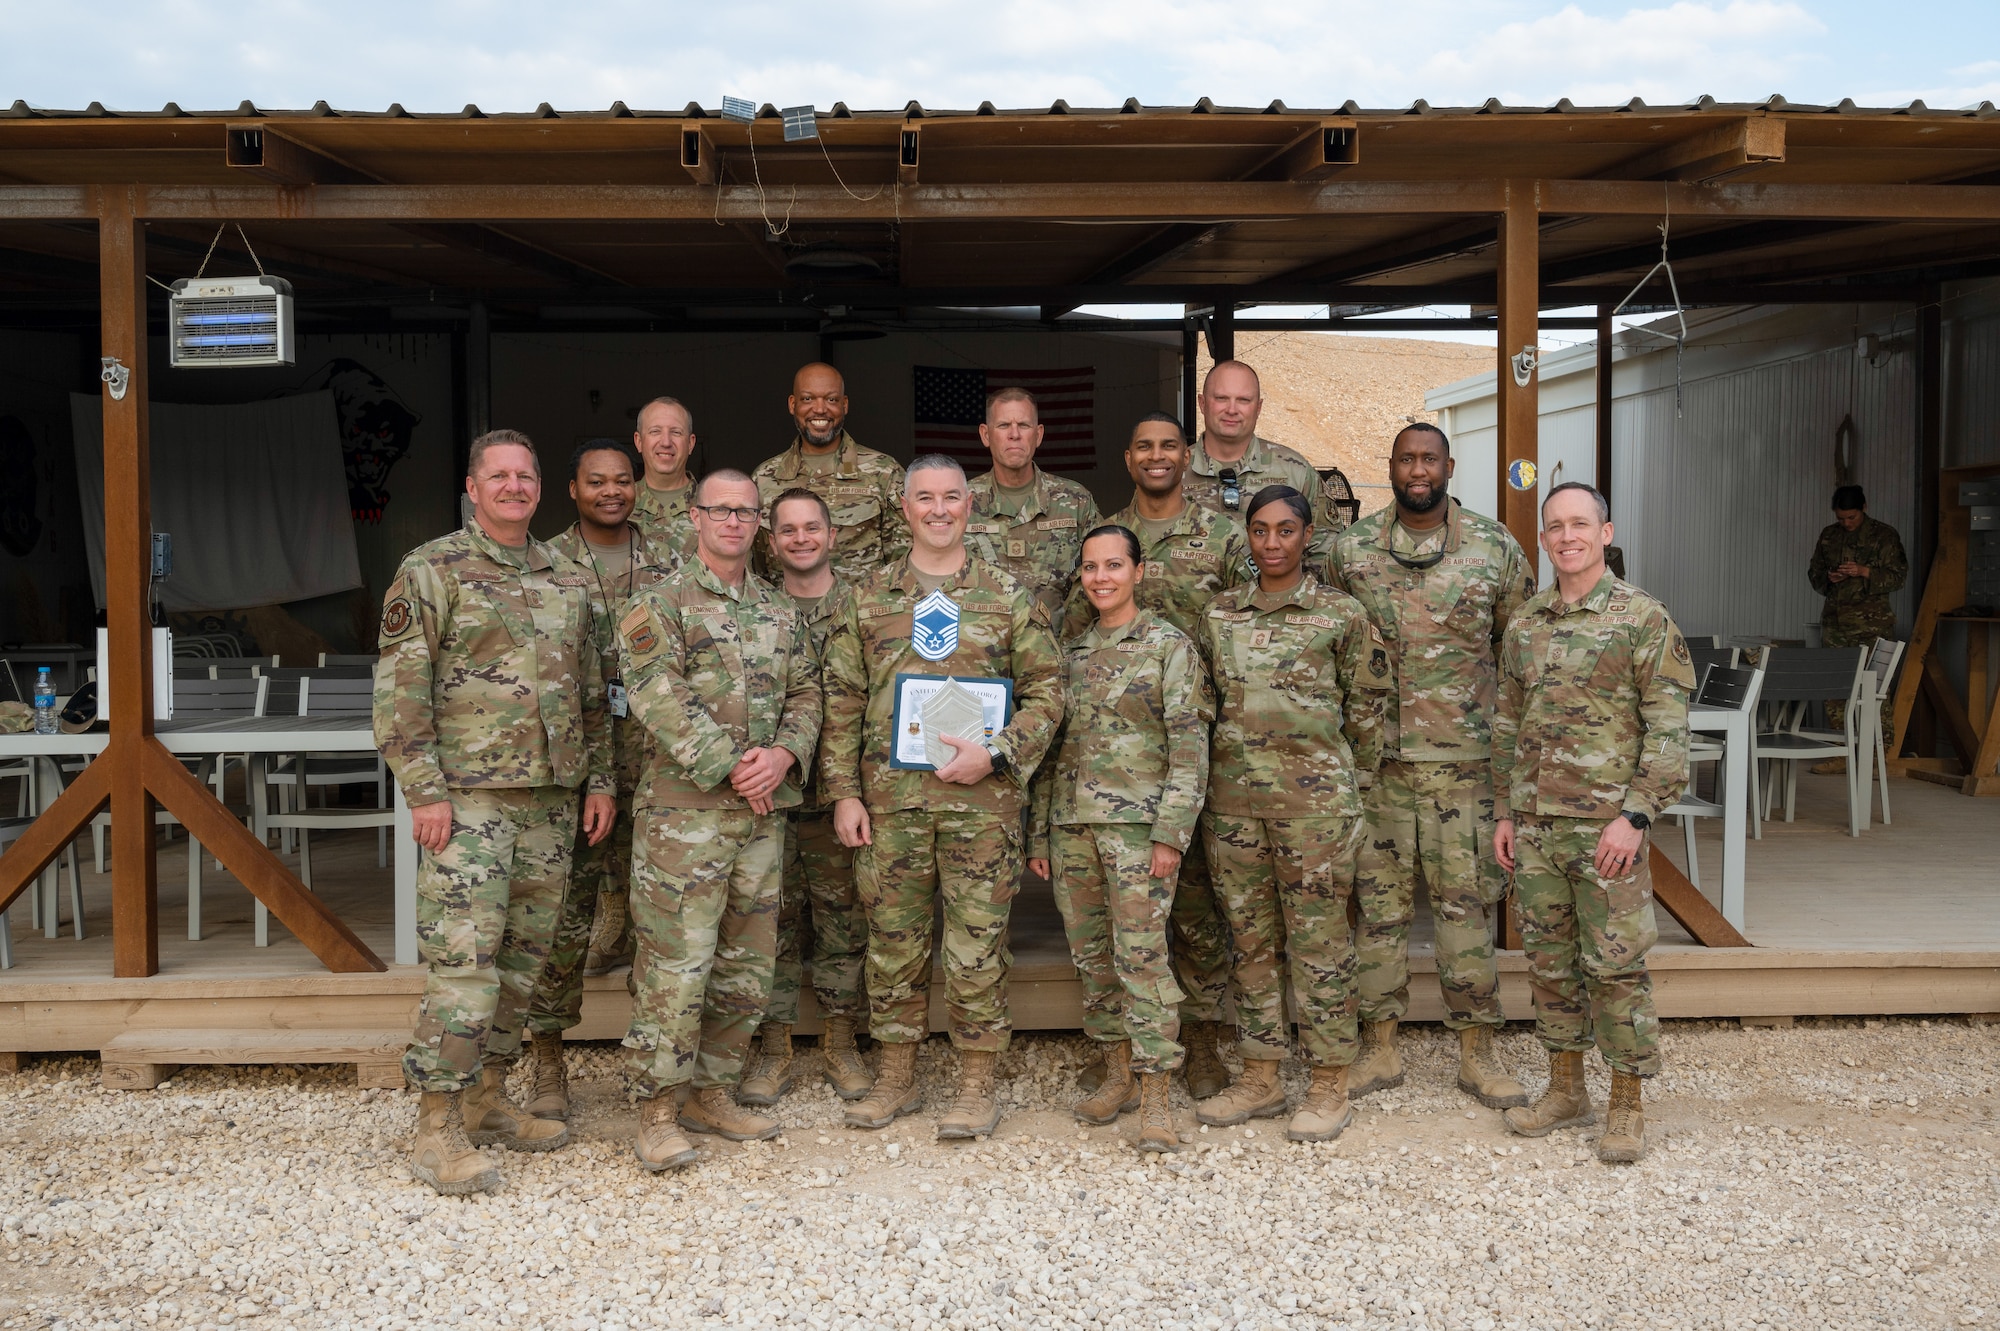 U.S. Air Force Chief Master Sgt. select Jonathan M. Steele, 332d Air Expeditionary Wing A4 Quality Assurance Division Chief (center), poses with other Chief Master Sergeants. during a promotion recognition at an undisclosed location, Southwest Asia, Tuesday, Dec. 5, 2020. Steele will officially put on rank in early 2023. (U.S. Air Force photo by Tech. Sgt. Richard Mekkri)